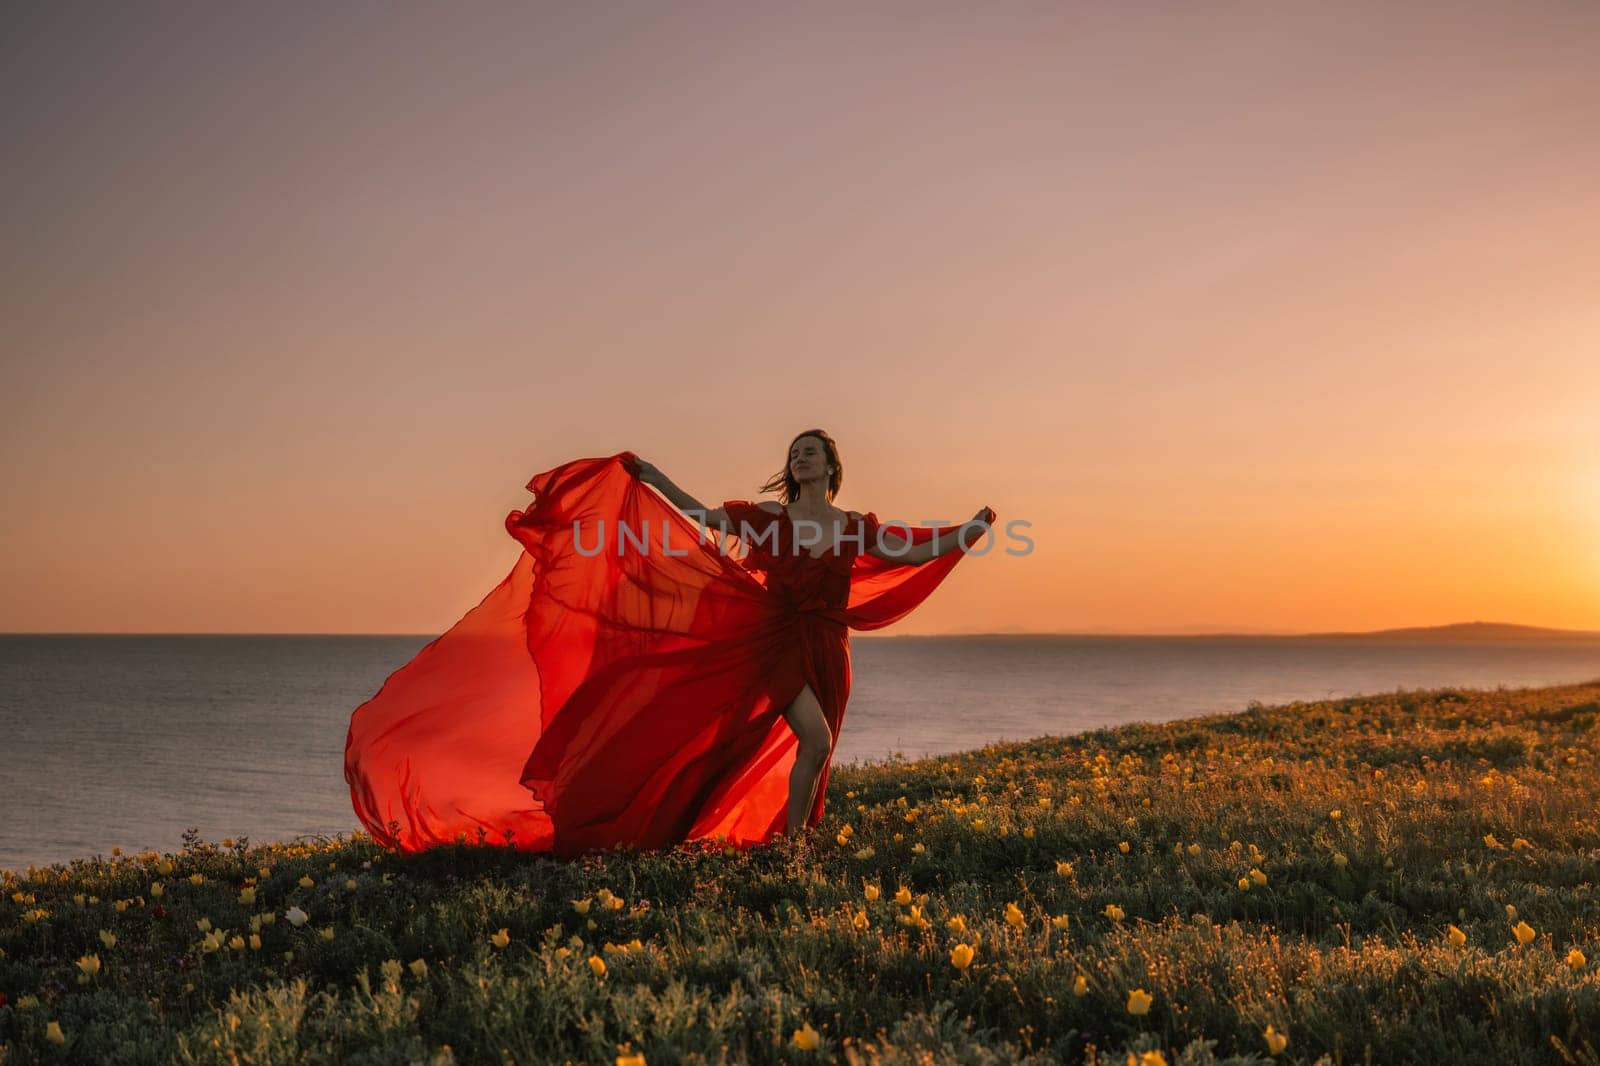 woman red dress is standing on a grassy hill overlooking the ocean. The sky is a beautiful mix of orange and pink hues, creating a serene and romantic atmosphere. by Matiunina